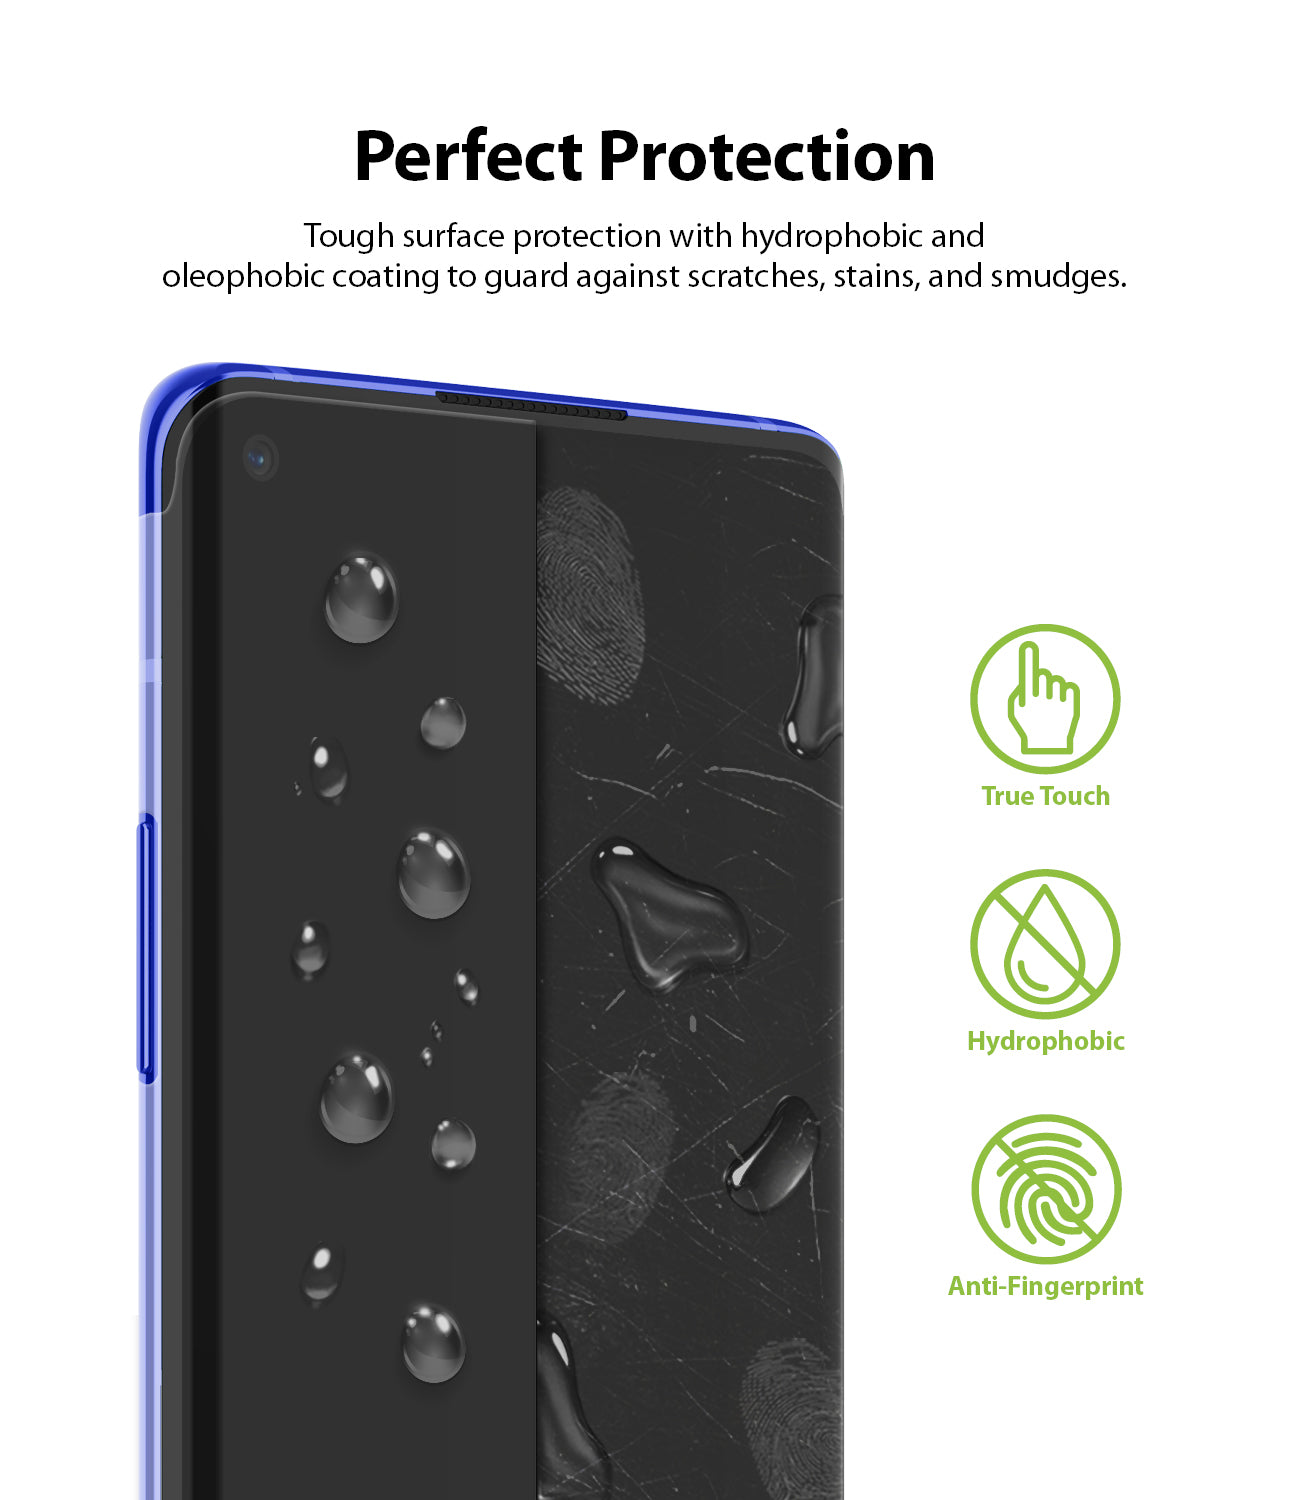 preferct protection - tough surface protection with hydrophobic and oleophobic coating 